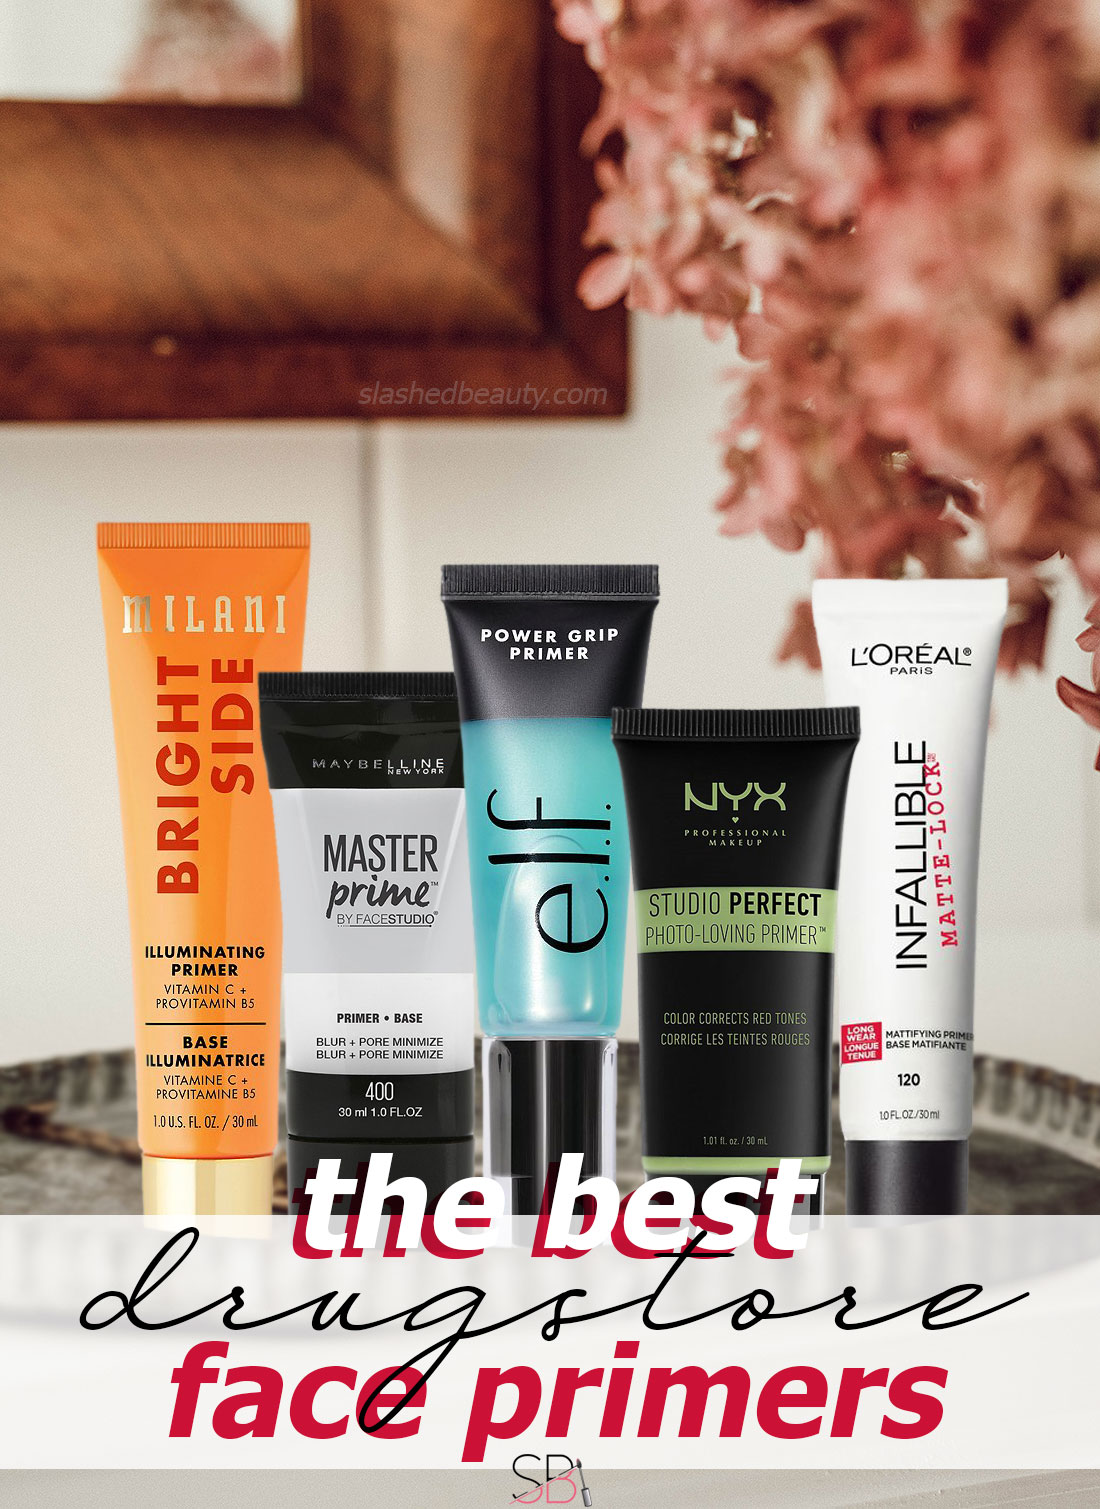 The Best Drugstore Primers for Every Goal & Skin Type Slashed Beauty